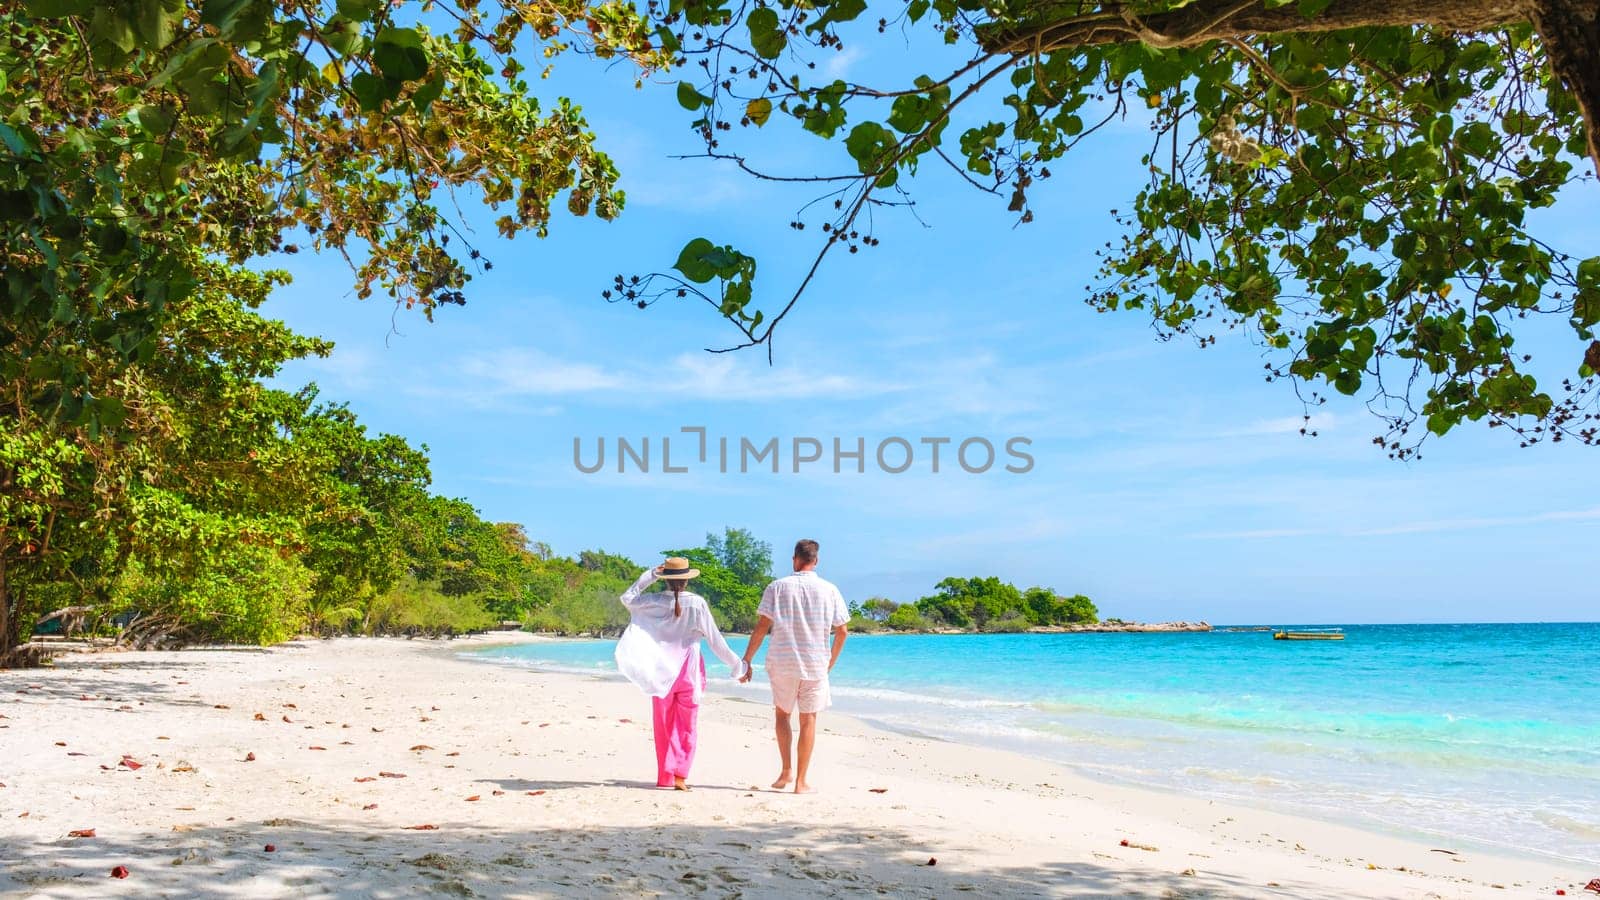 A couple of men and woman walking on the beach of Koh Samet Island Rayong Thailand, the white tropical beach of Samed Island with a turqouse colored ocean